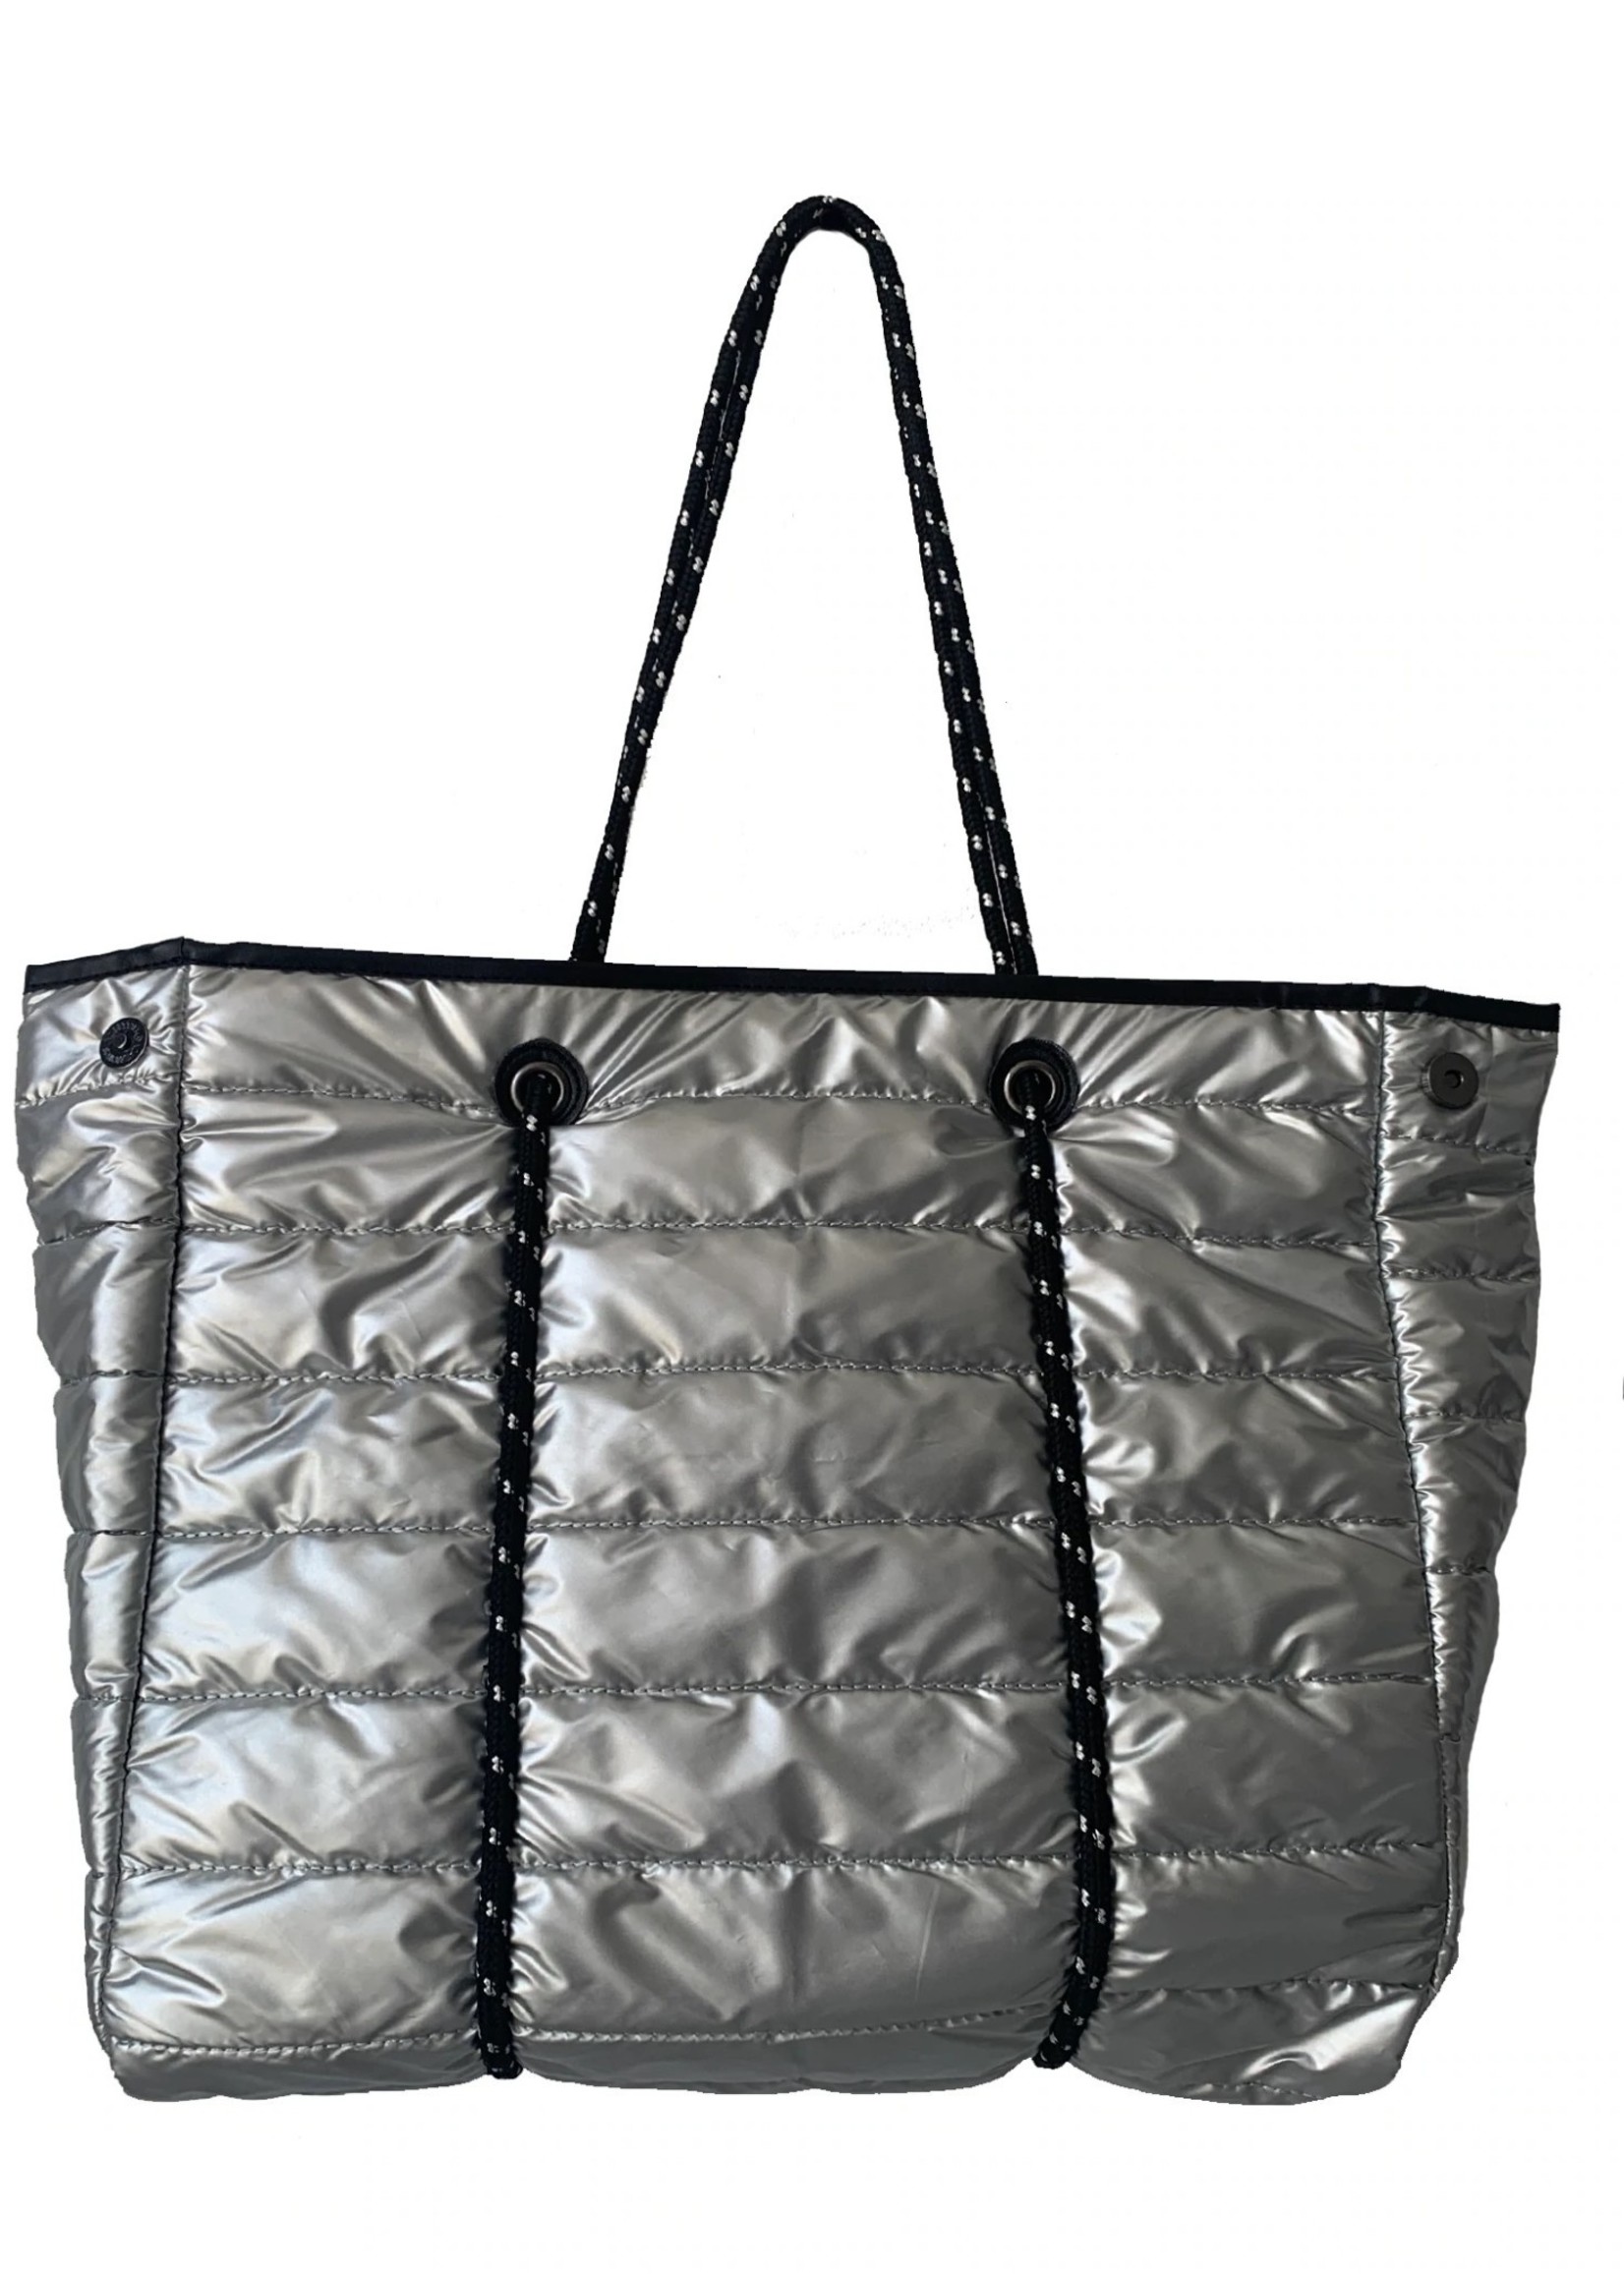 Ahdorned Puffy Tote W/Rope Straps